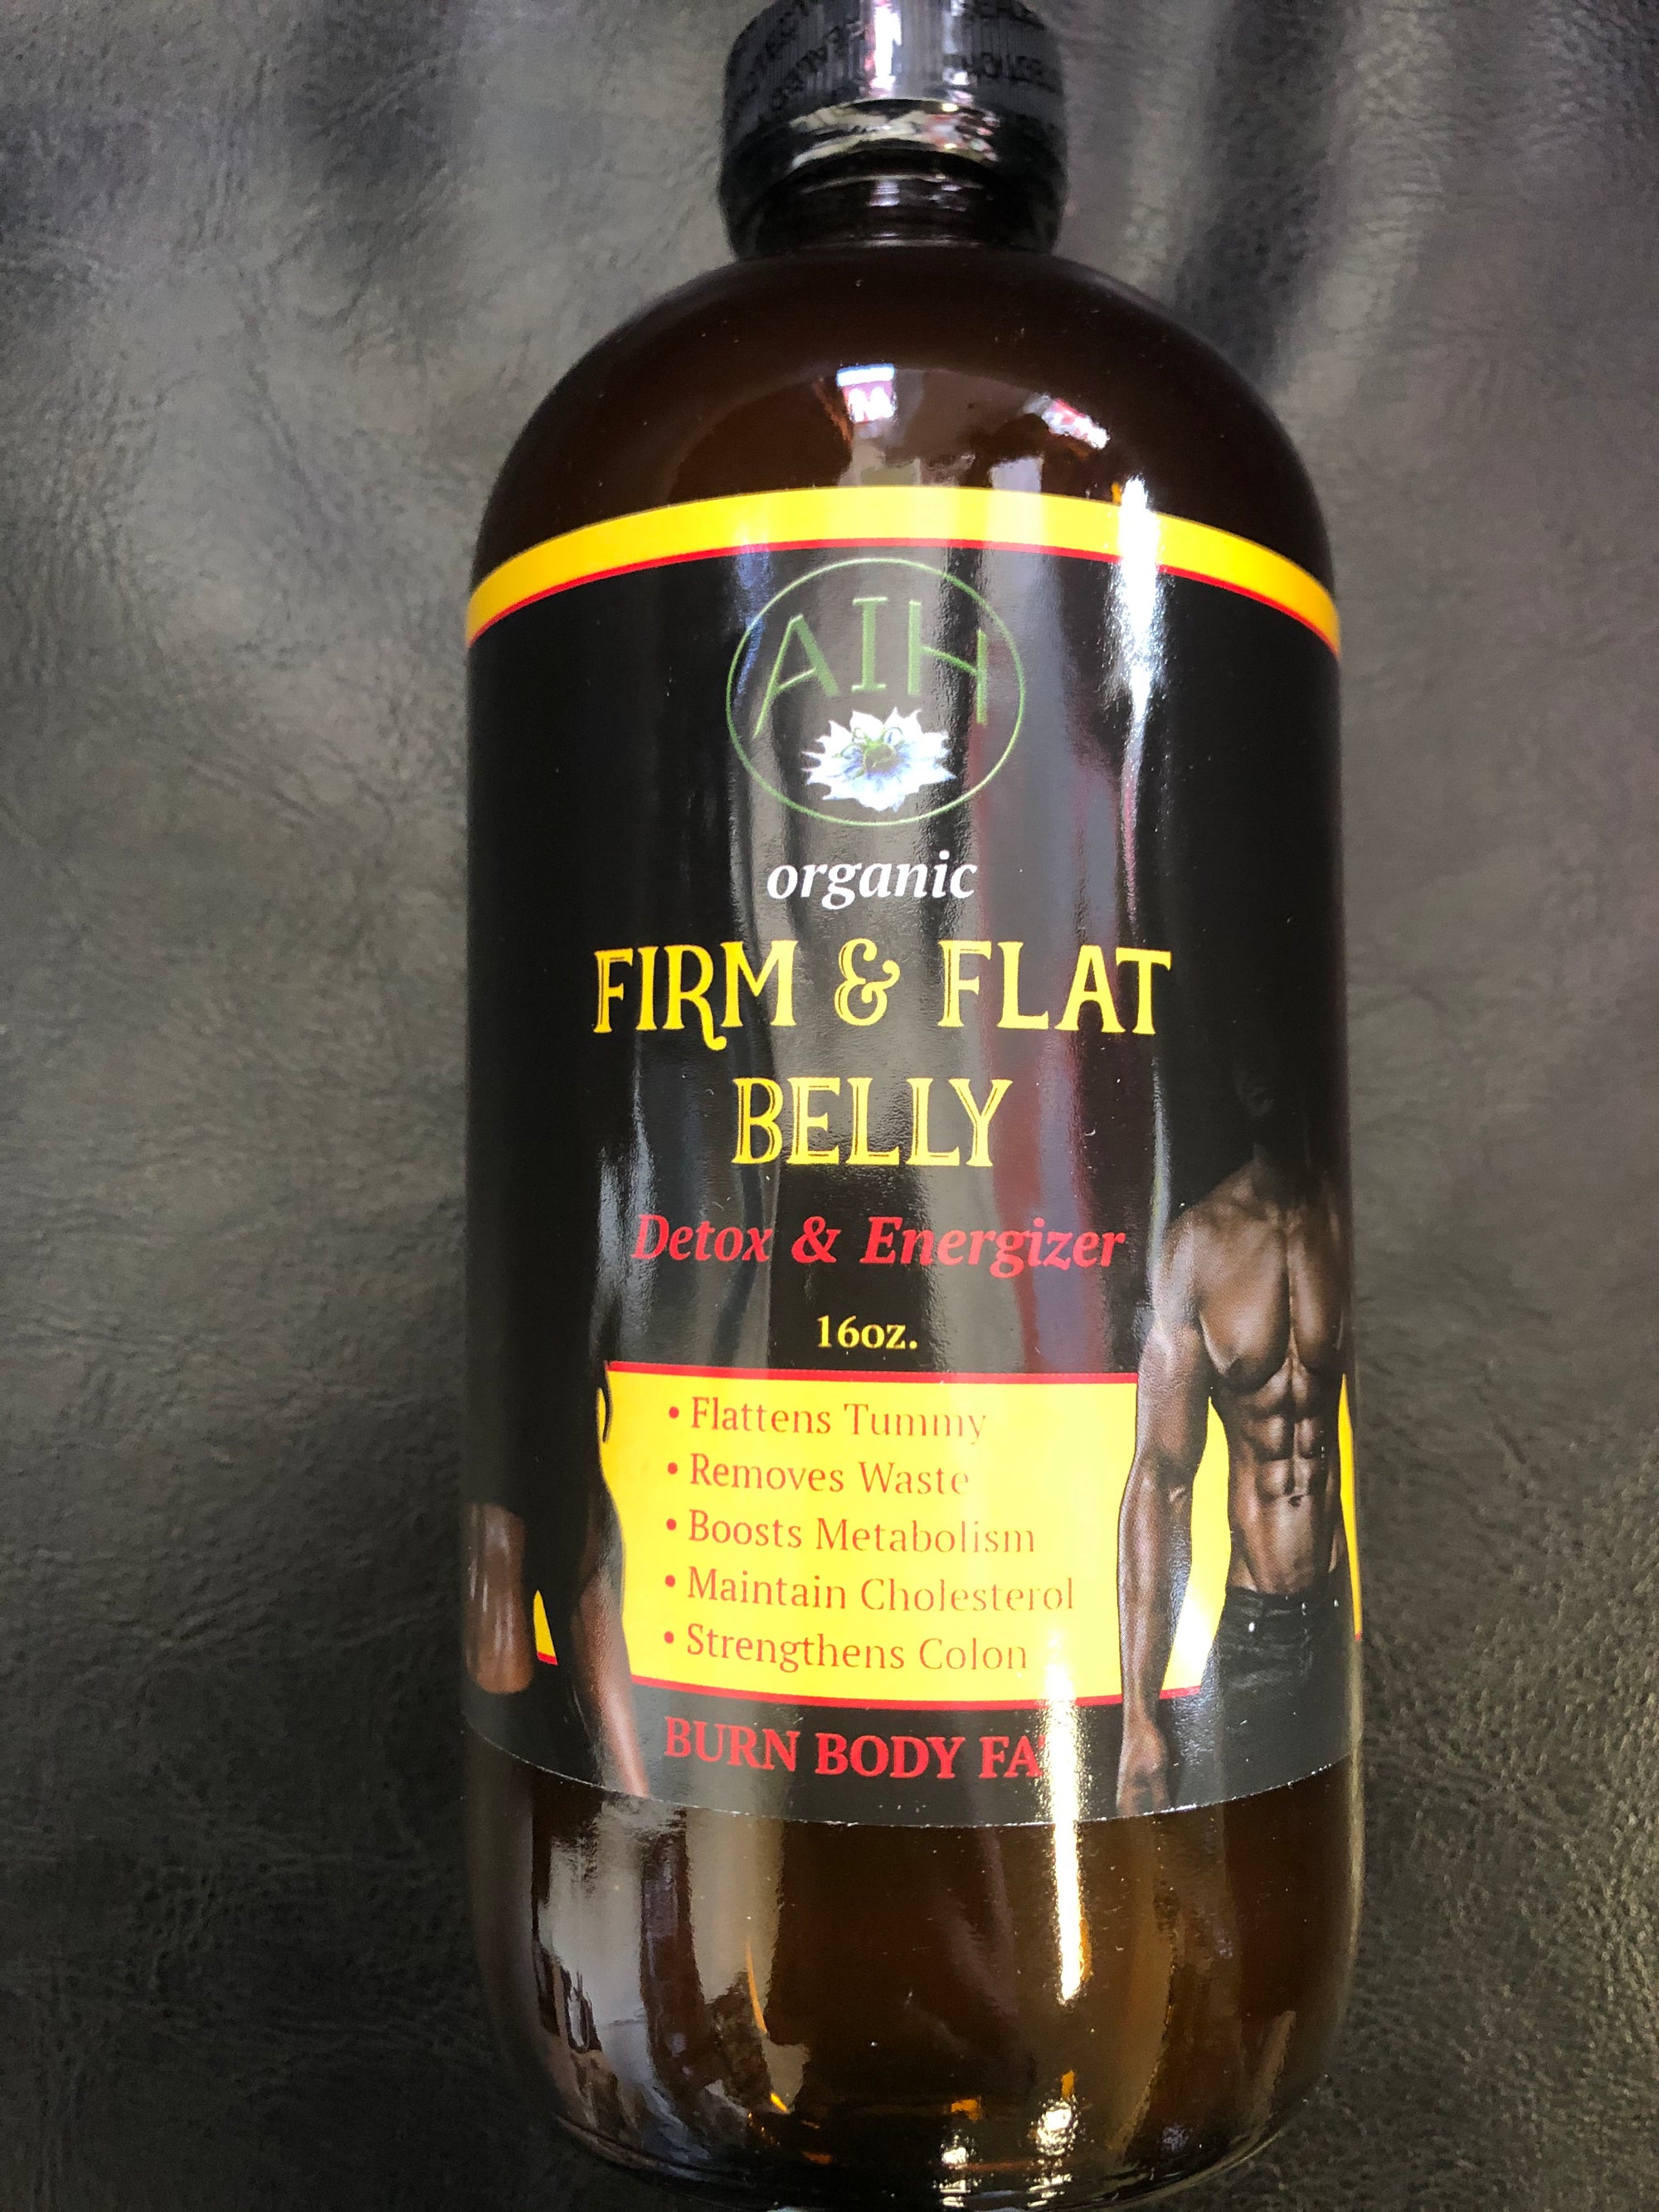 Firm & Flat Belly (detox and energizer) 16oz